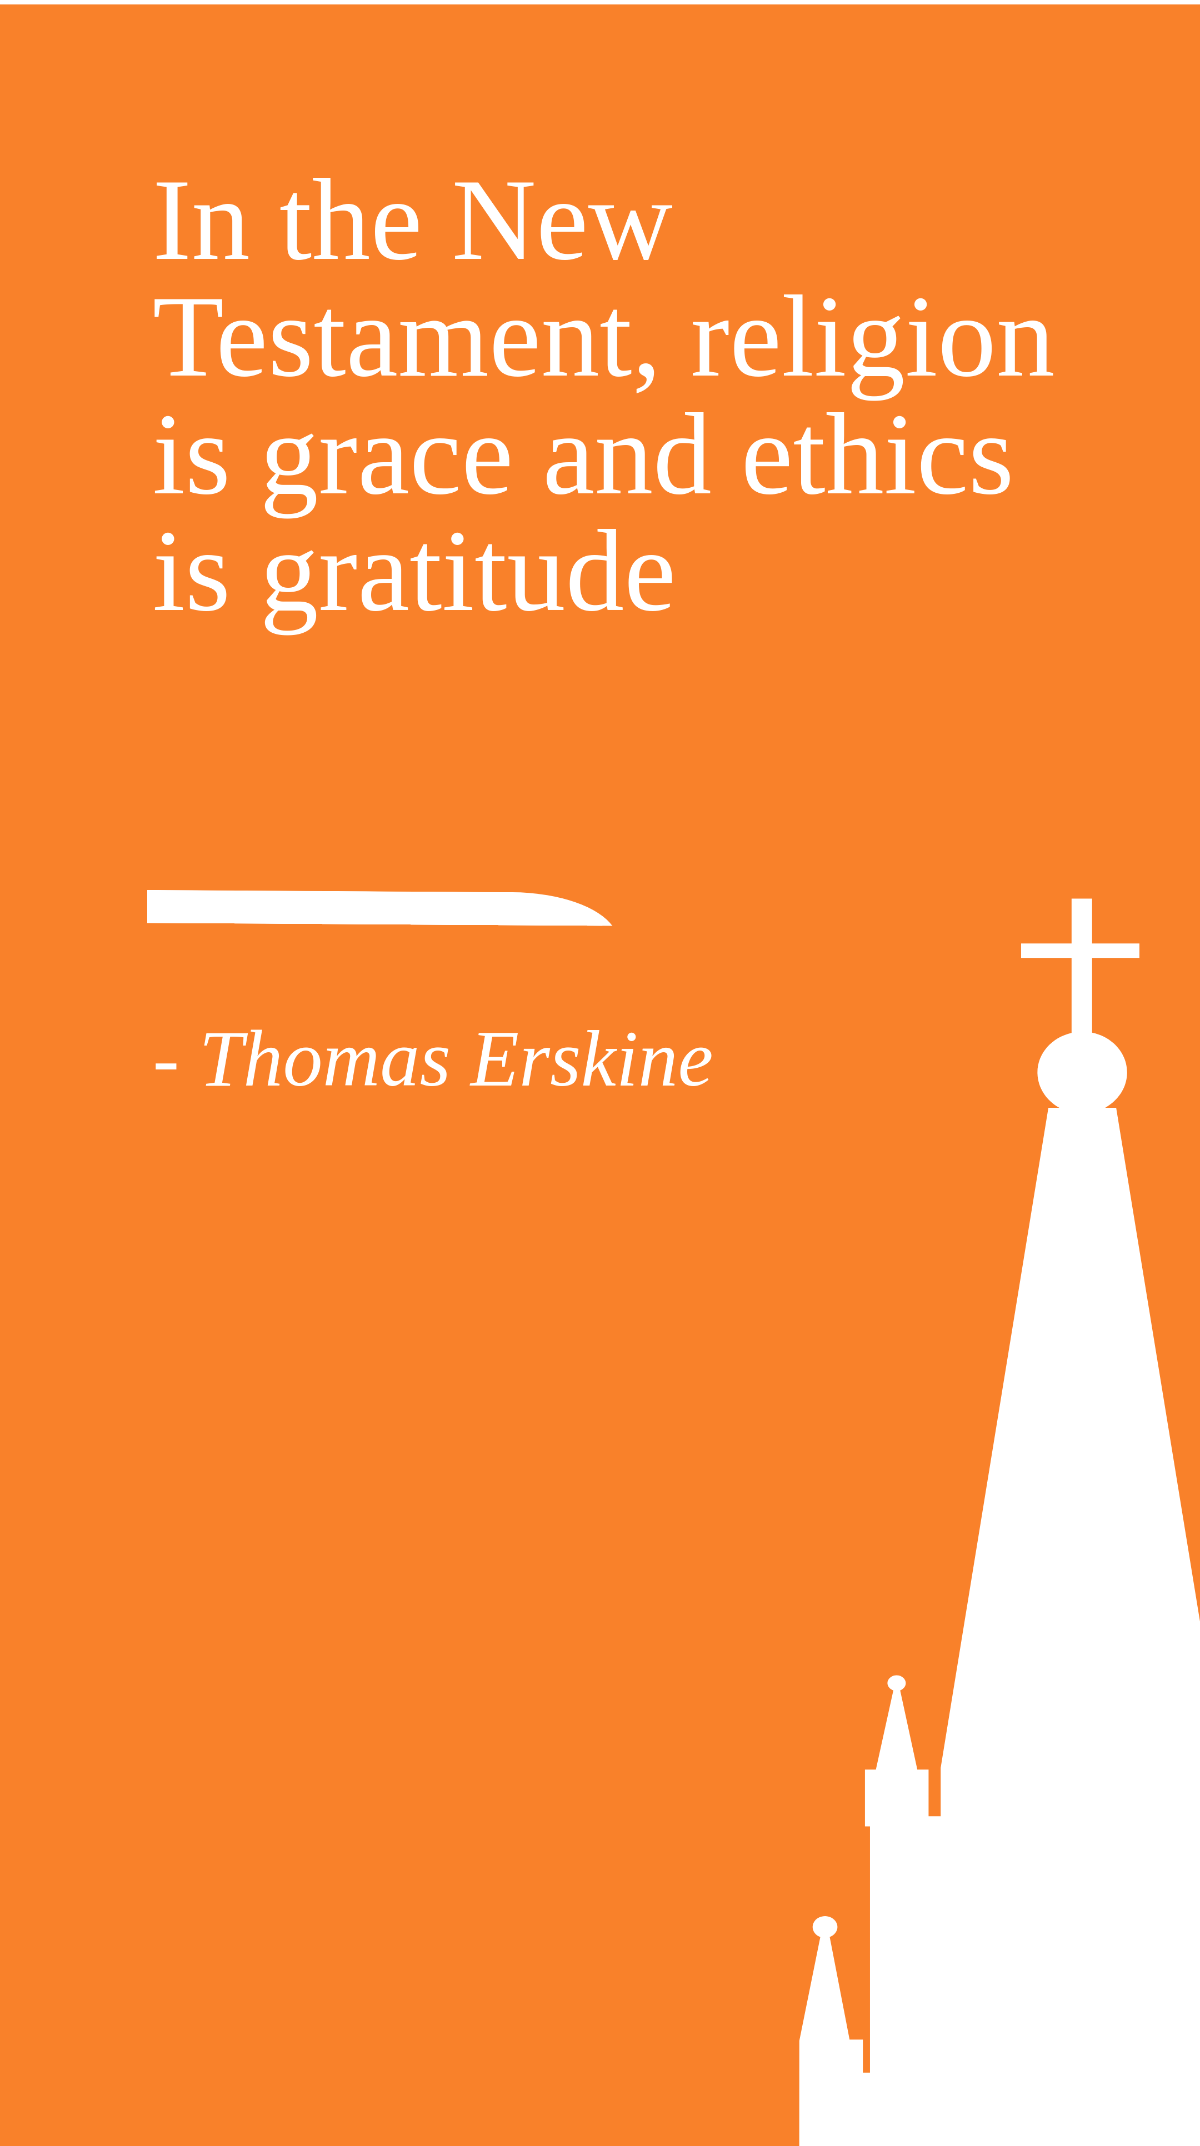 Thomas Erskine -In the New Testament, religion is grace and ethics is gratitude